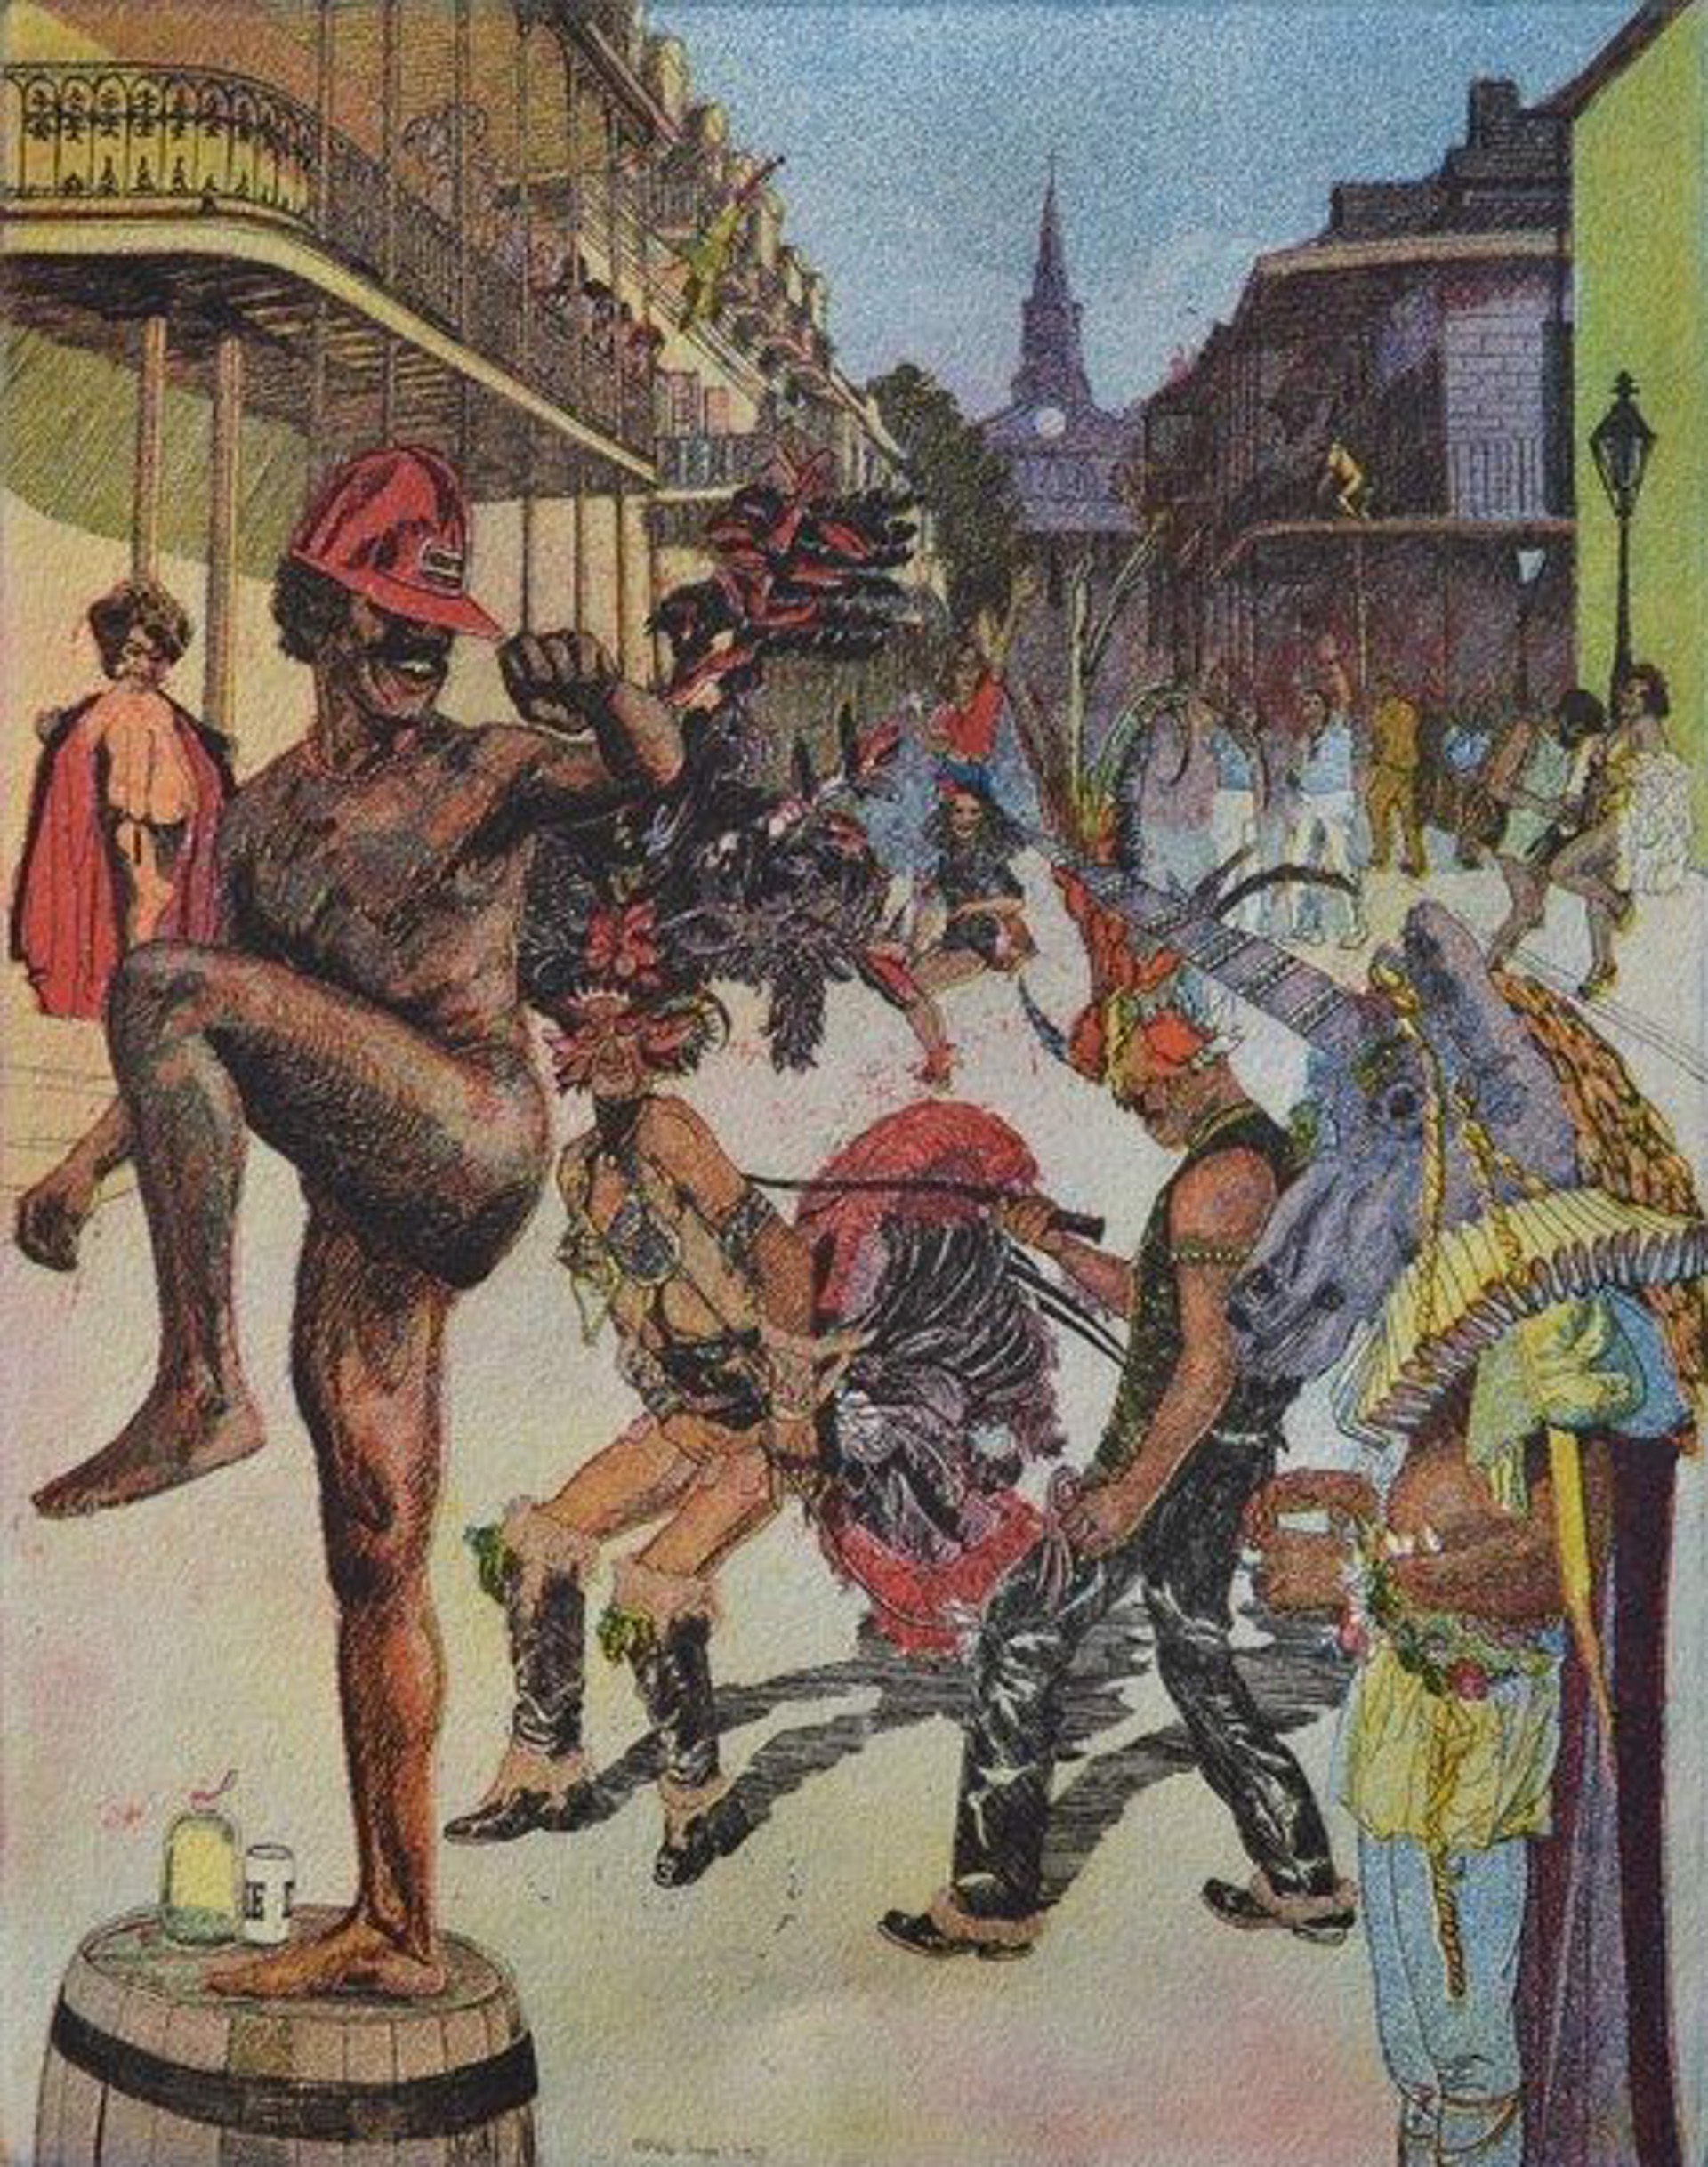 Maskers in the Street by Phillip Sage